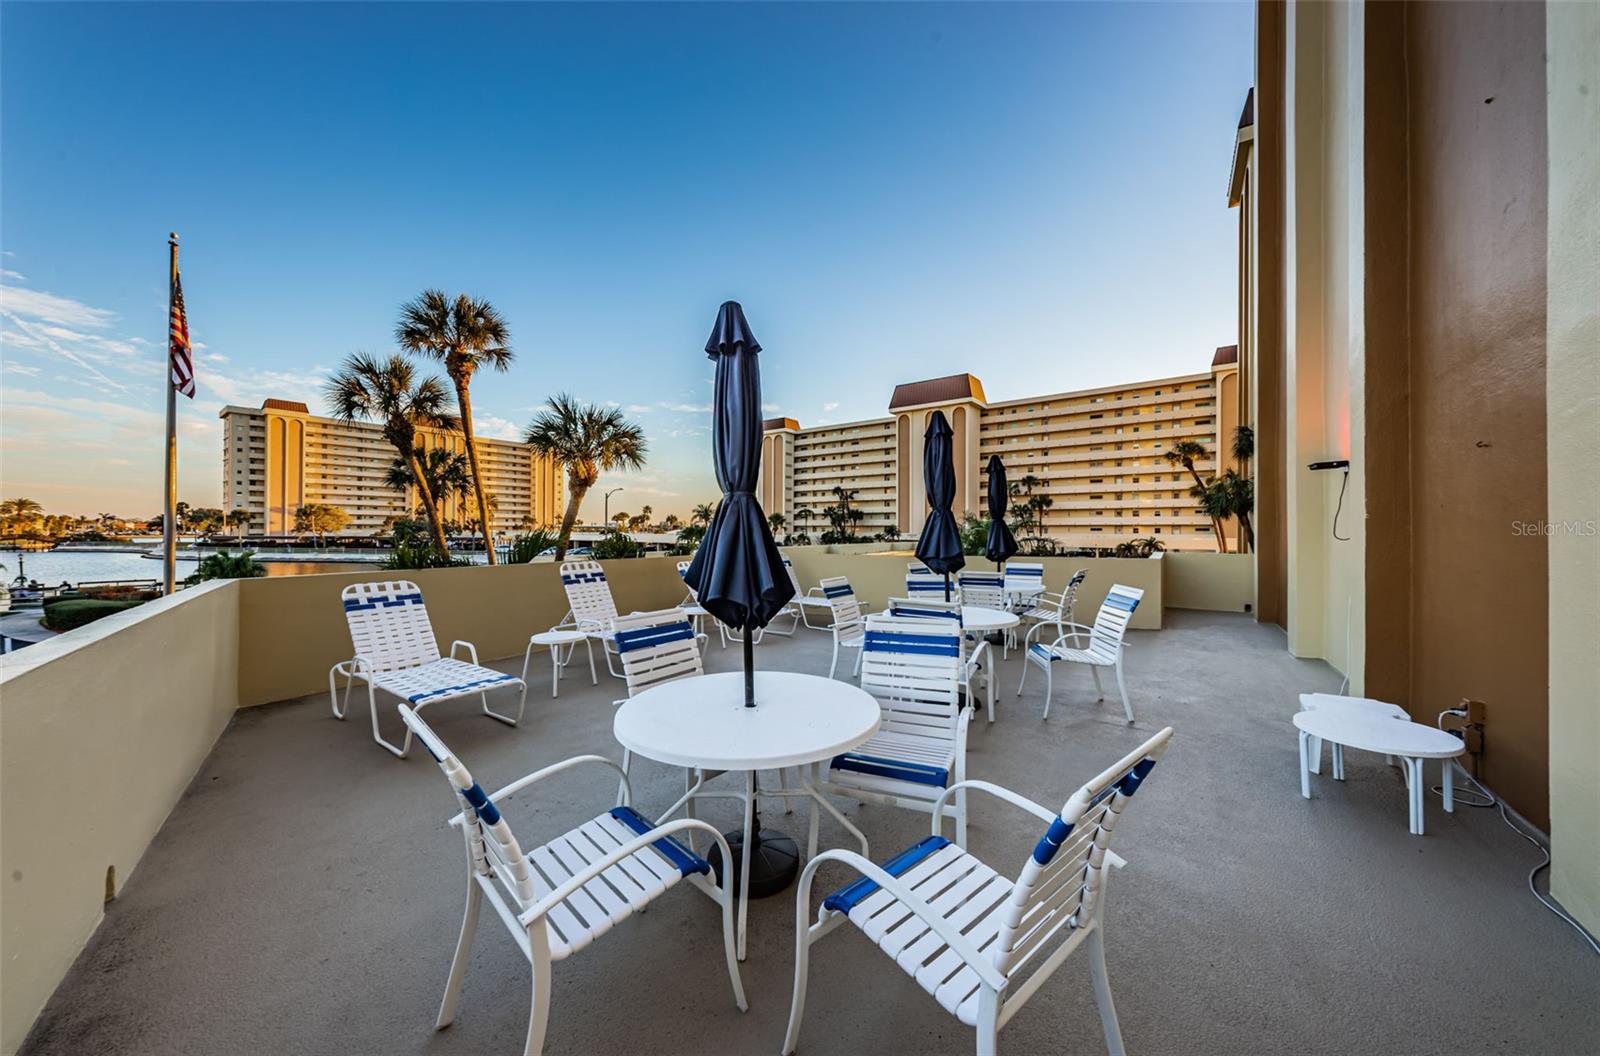 .. 2nd Floor of the Columbia Enjoys a Roof Deck Overlooking the Lagoon. Each Building has It's Own Deck Area Besides Sharing Common Grounds - Pool Areas and Amenities.